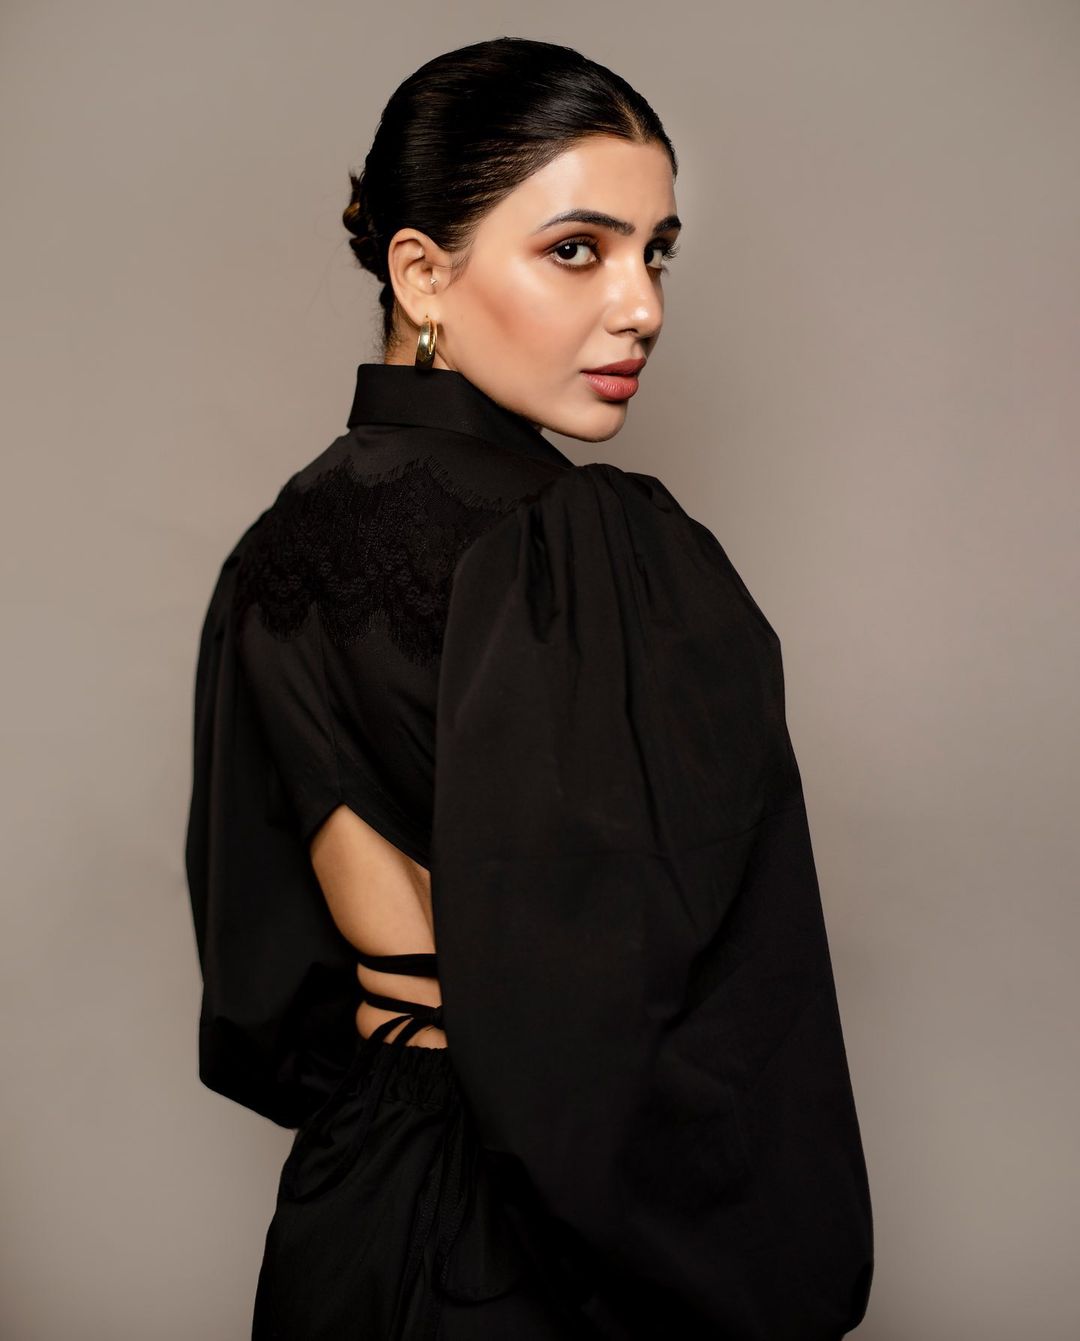 Samantha Ruth Prabhu Photoshoot in Black Outfit by Preetham Jukalker Collection 11/20/2021 3